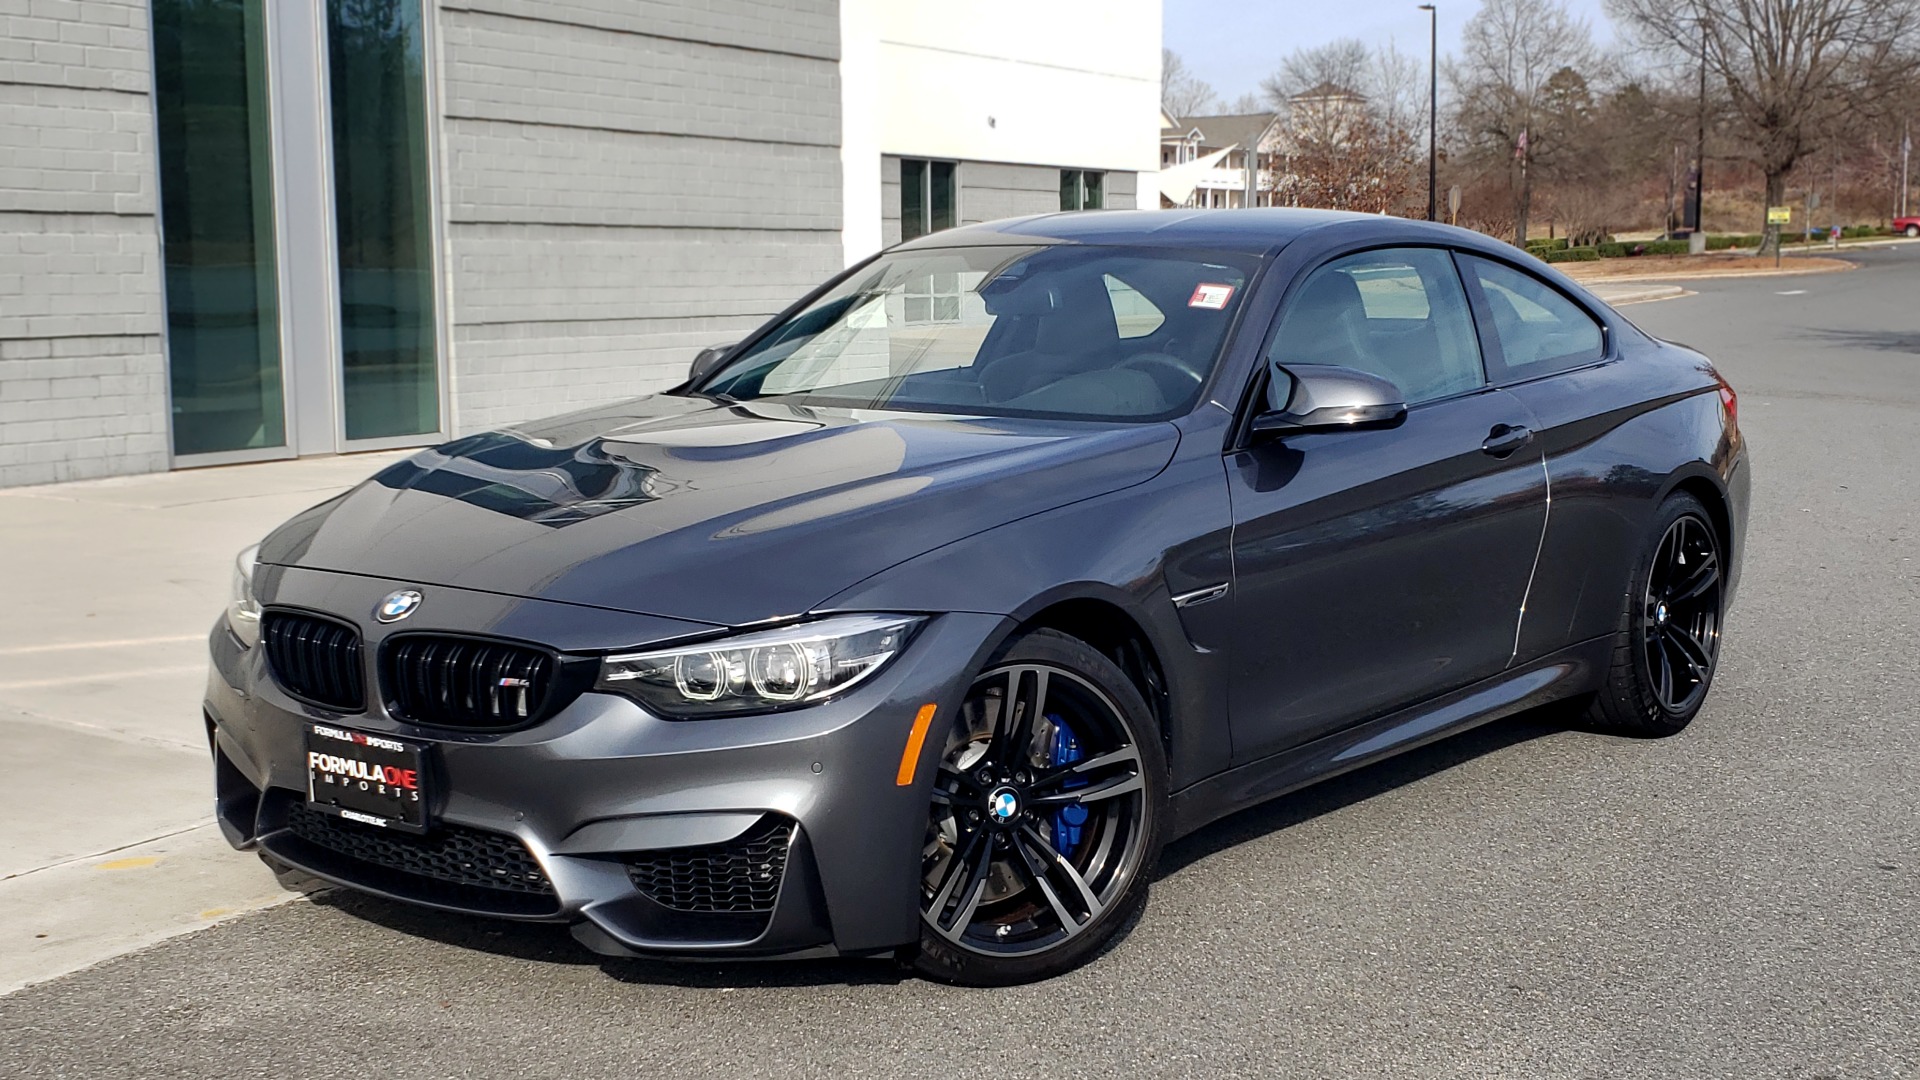 Used 2019 BMW M4 COUPE 3.0L 425HP / 7-SPD AUTO / NAV / 19-IN WHEELS / REARVIEW for sale $67,999 at Formula Imports in Charlotte NC 28227 1